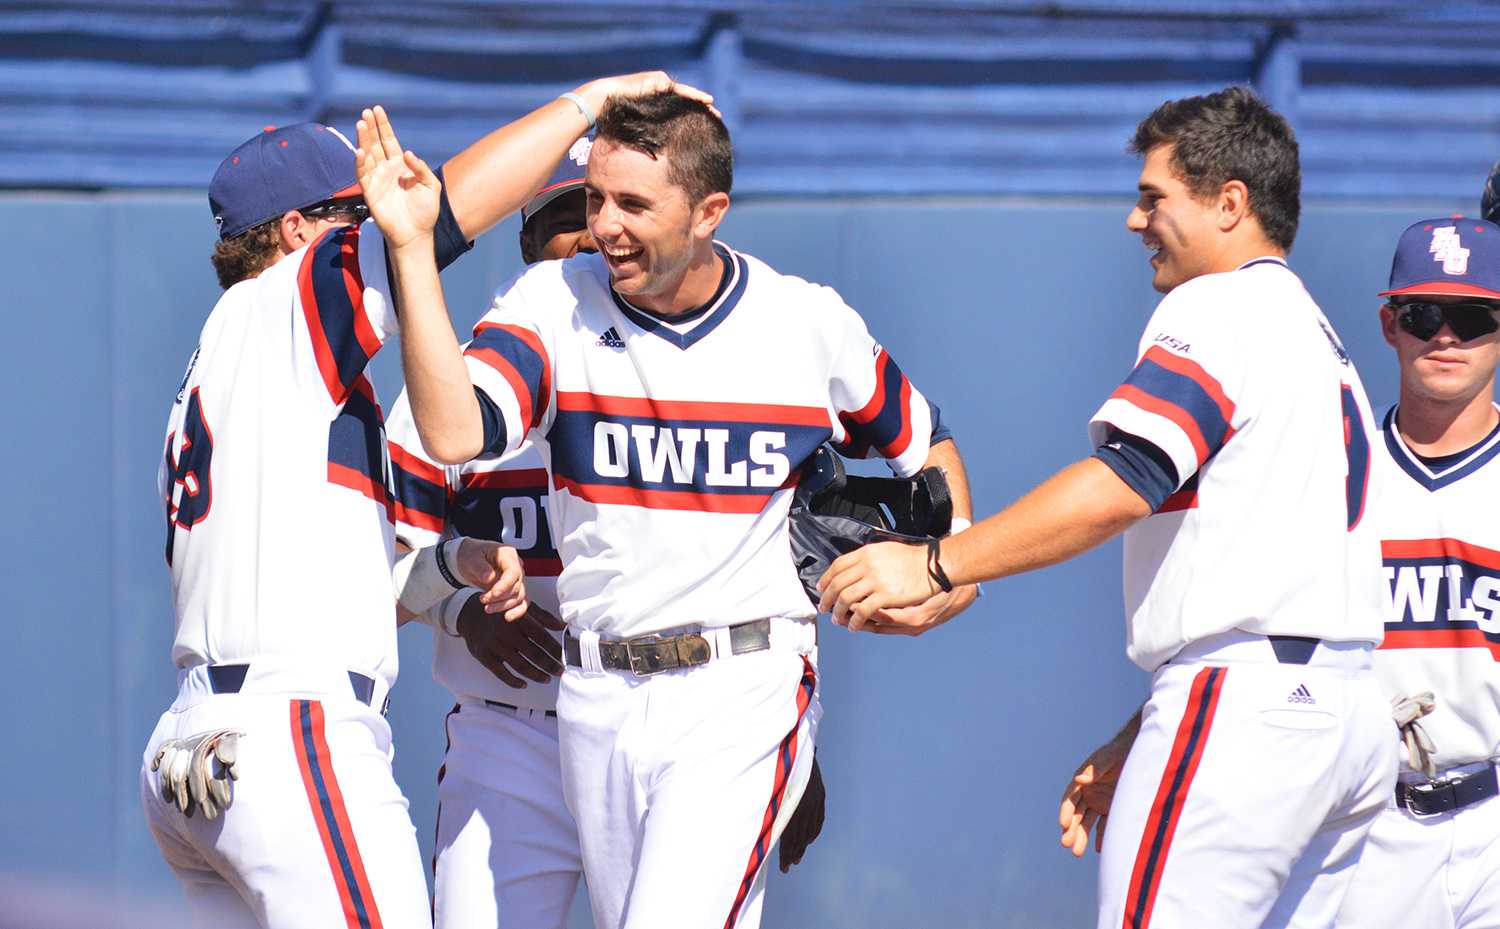 Sophomore infielder CJ Chatham is greeted by teammates after being driven in by Brett Lashley single in the sixth inning of the third game. Chatham scored one of the  Owls’ five runs that game. 